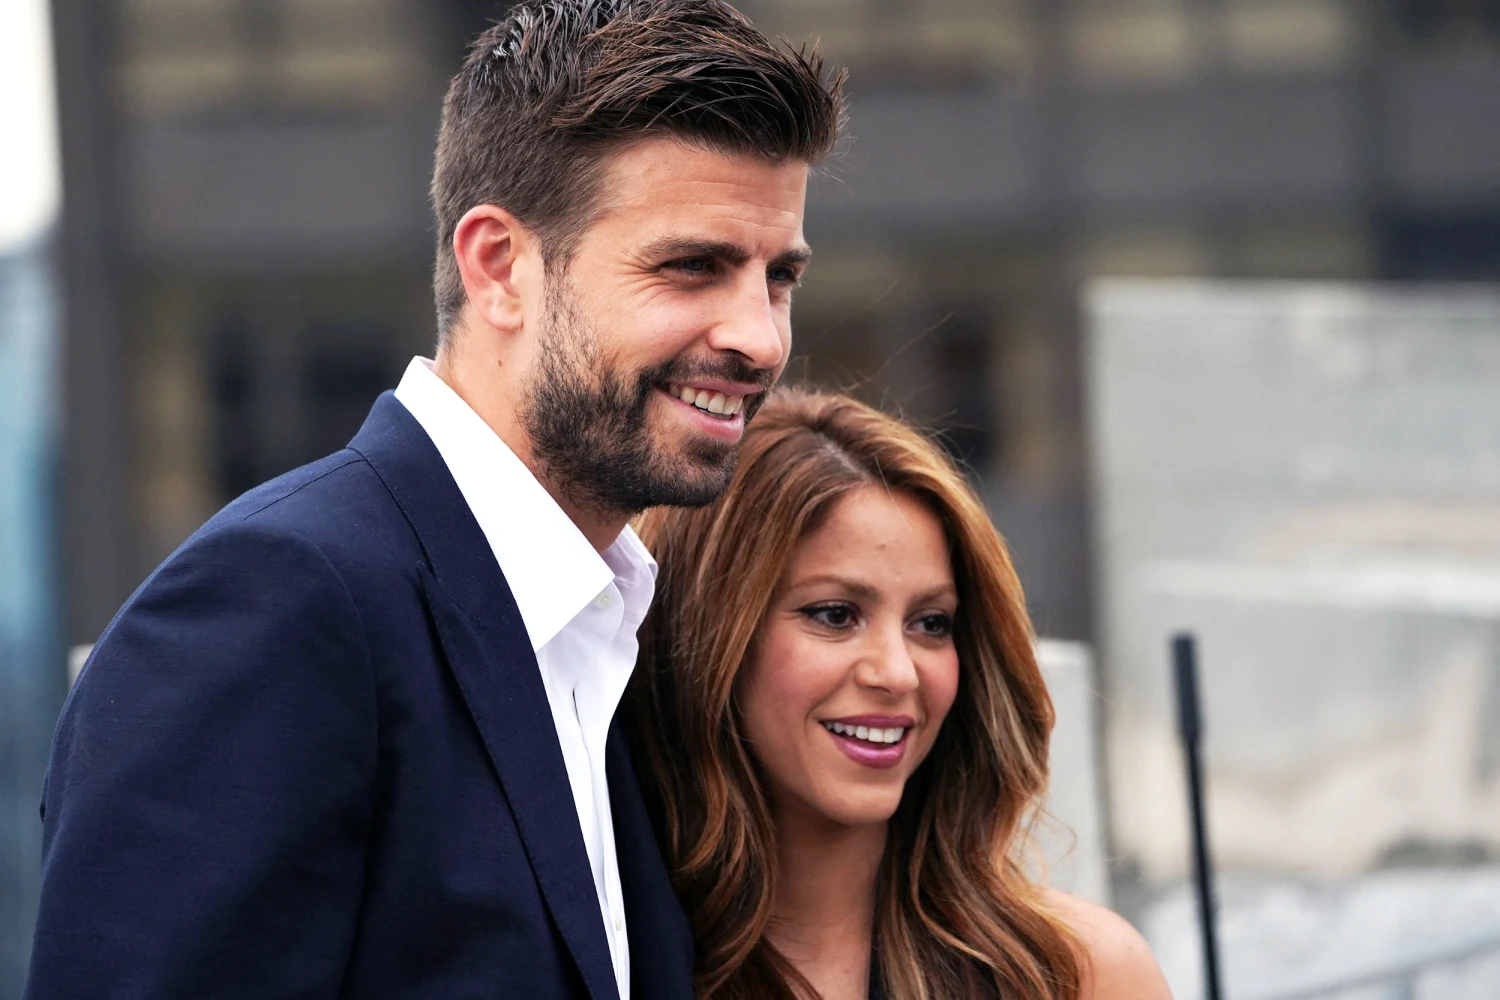 A silhouetted side profile of Pique and Shakira walking hand-in-hand, with their past relationship intersecting the background like a timeline of their love story.